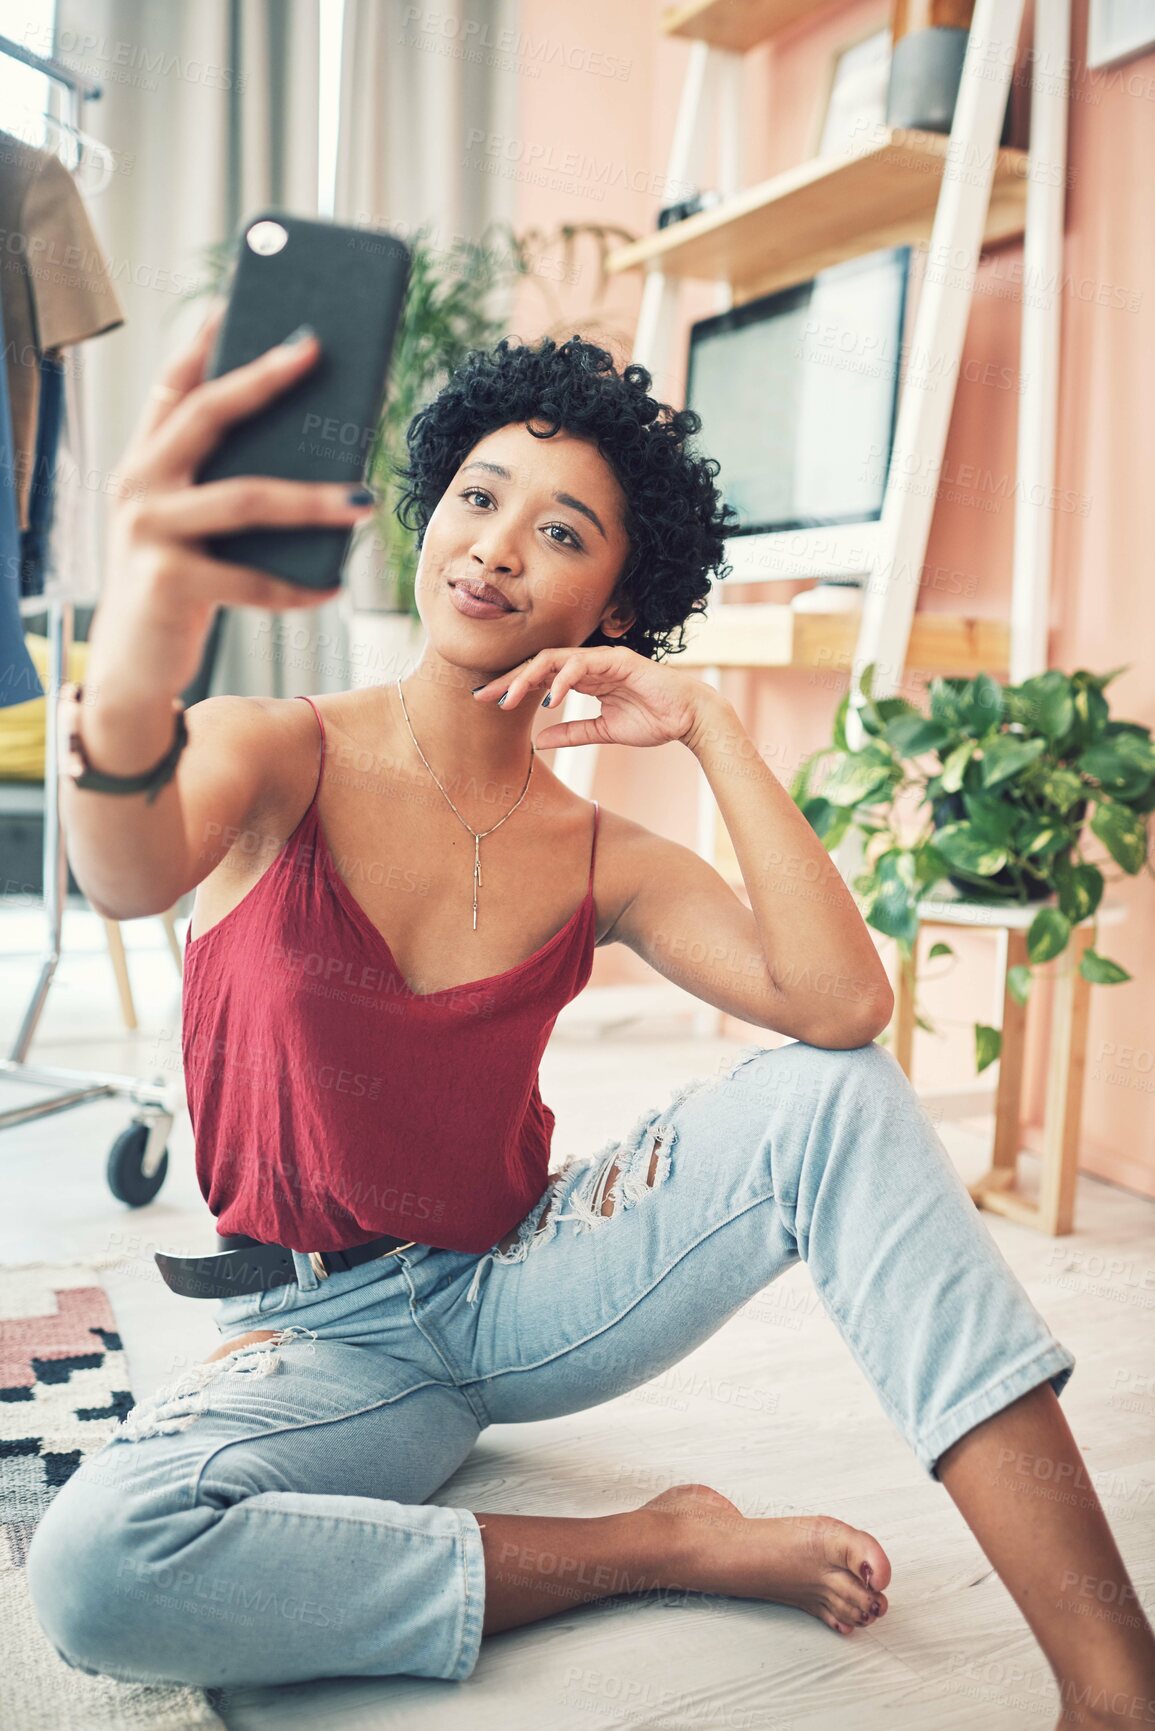 Buy stock photo Shot of a beautiful young woman taking a selfie while sitting at home